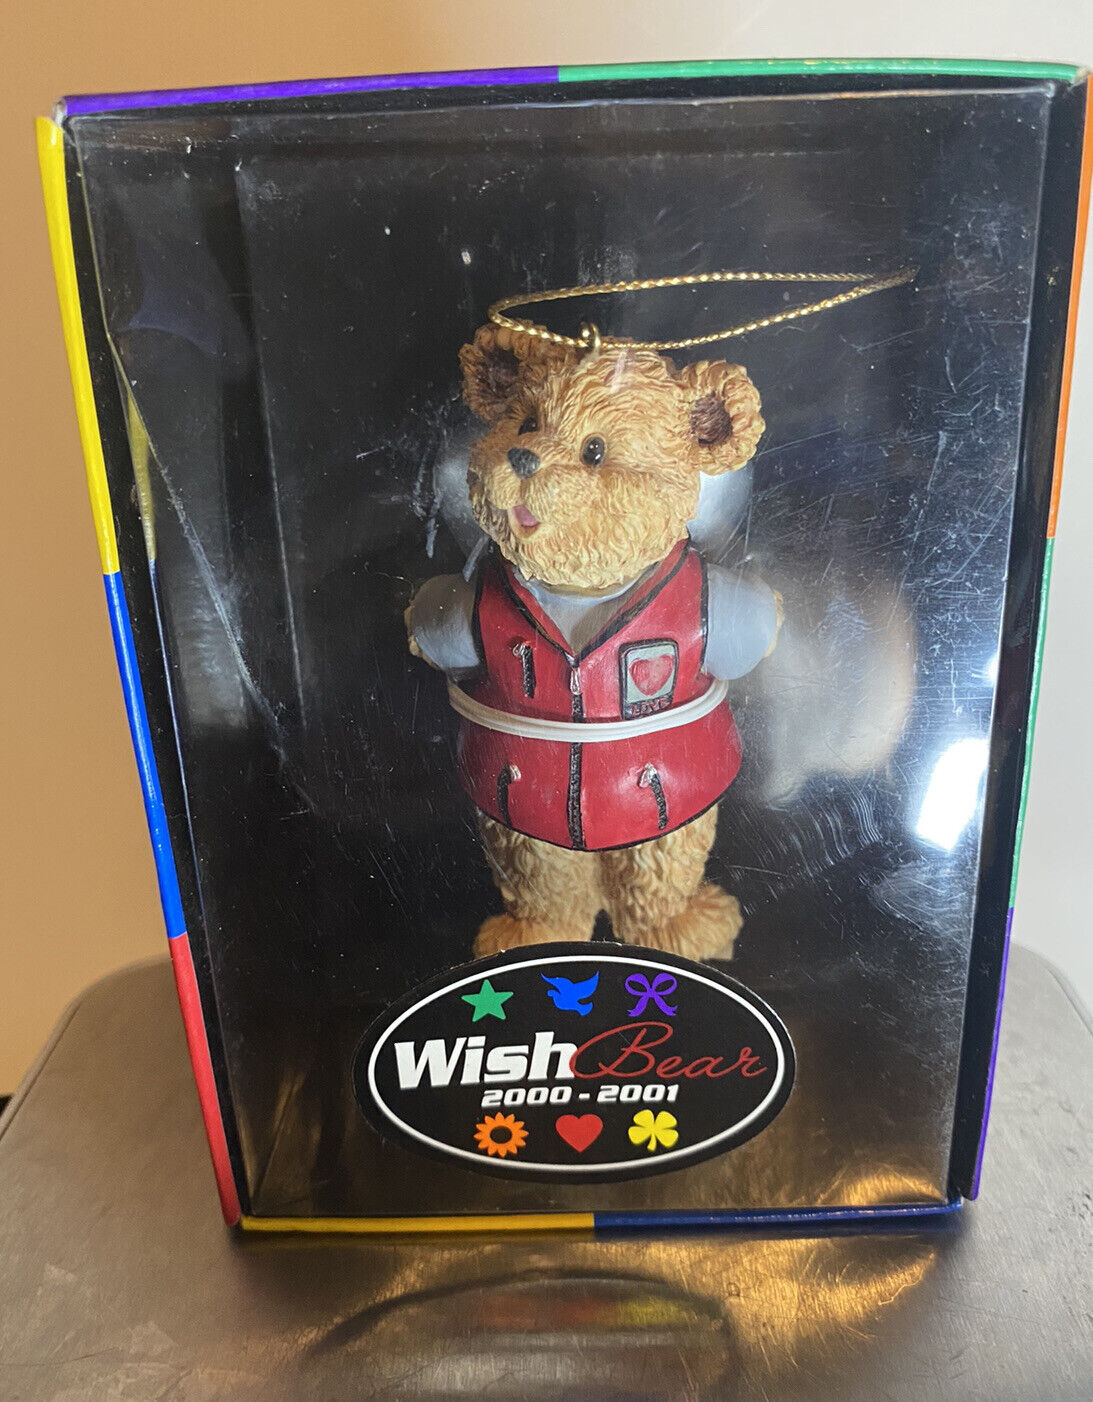 WISH BEAR LOVE 2000 2001 HOLIDAY Tree ORNAMENT Christmas New in Package